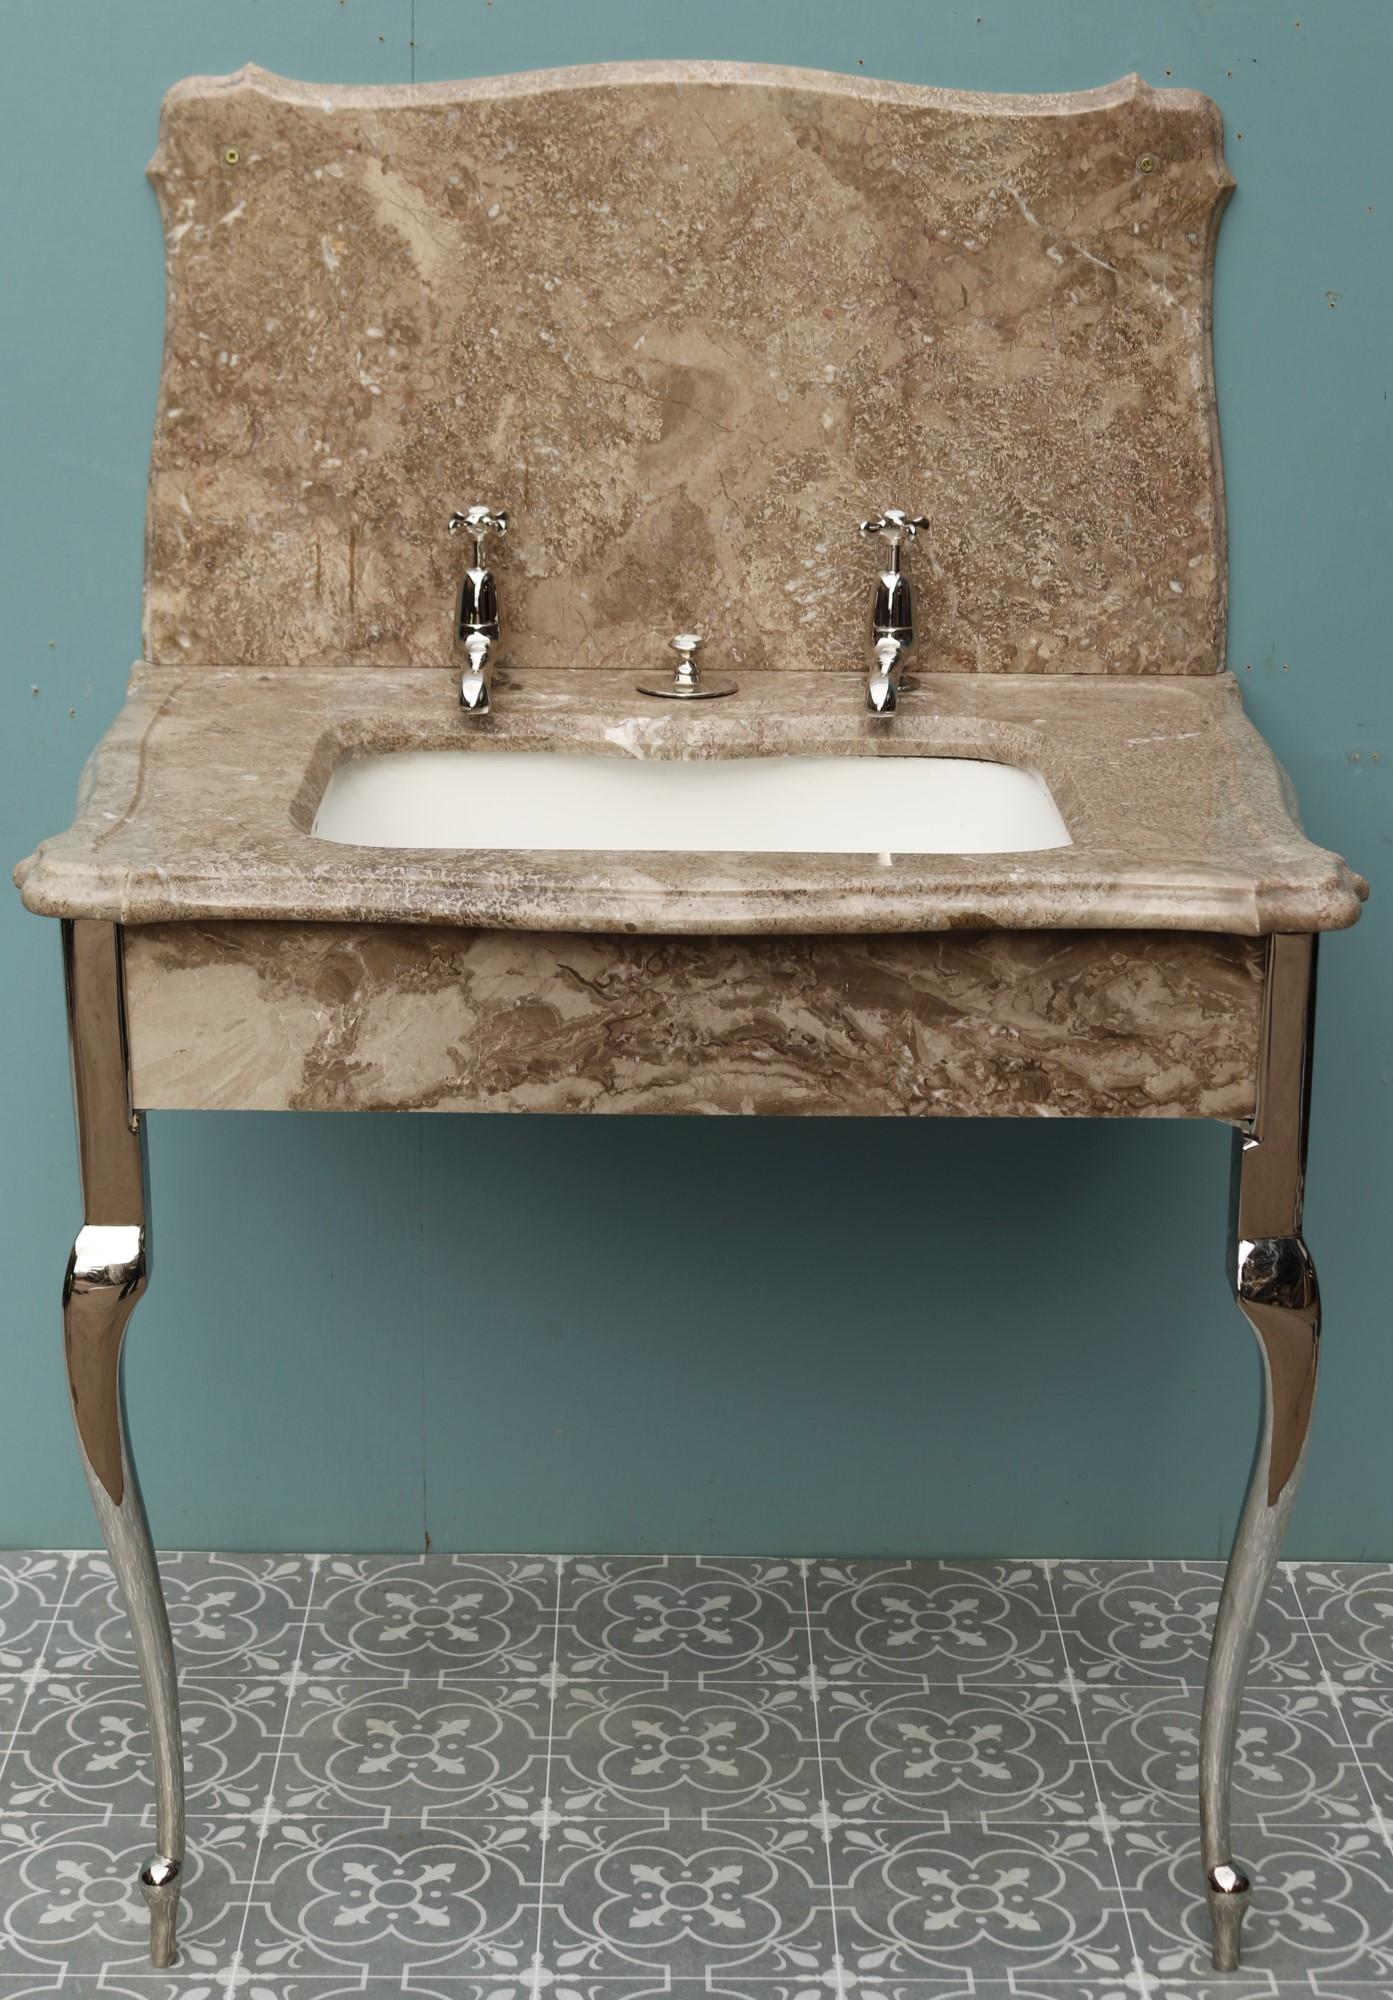 A pretty mottled brown marble wash stand with undermounted plunger basin. Most likely by Shanks or Bolding. With nickel plated legs, taps and plunger waste.
 
Supplied in fully restored condition.
 
Additional Dimensions
 
Overall Height 121 cm
